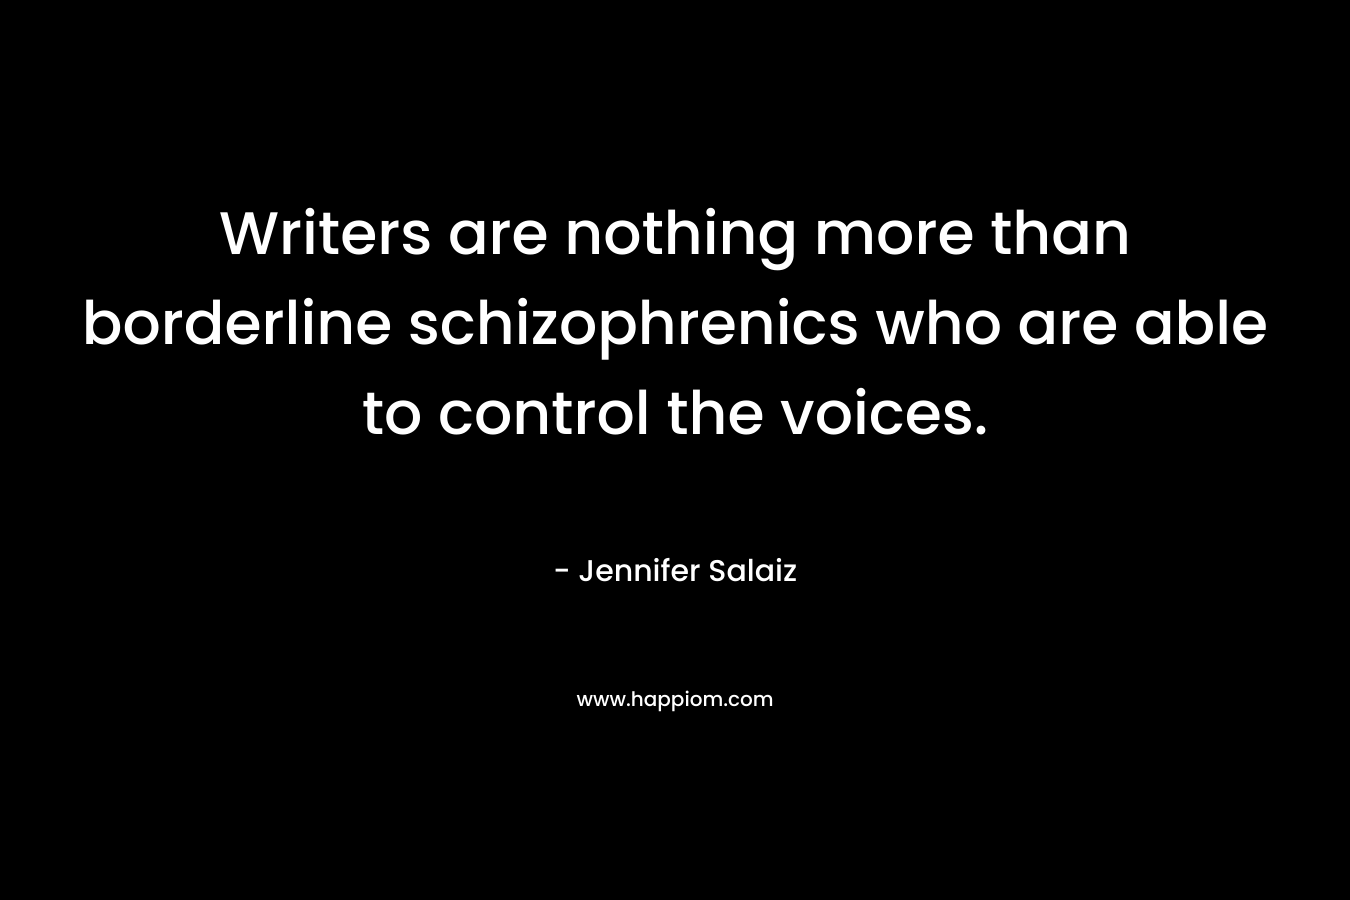 Writers are nothing more than borderline schizophrenics who are able to control the voices.